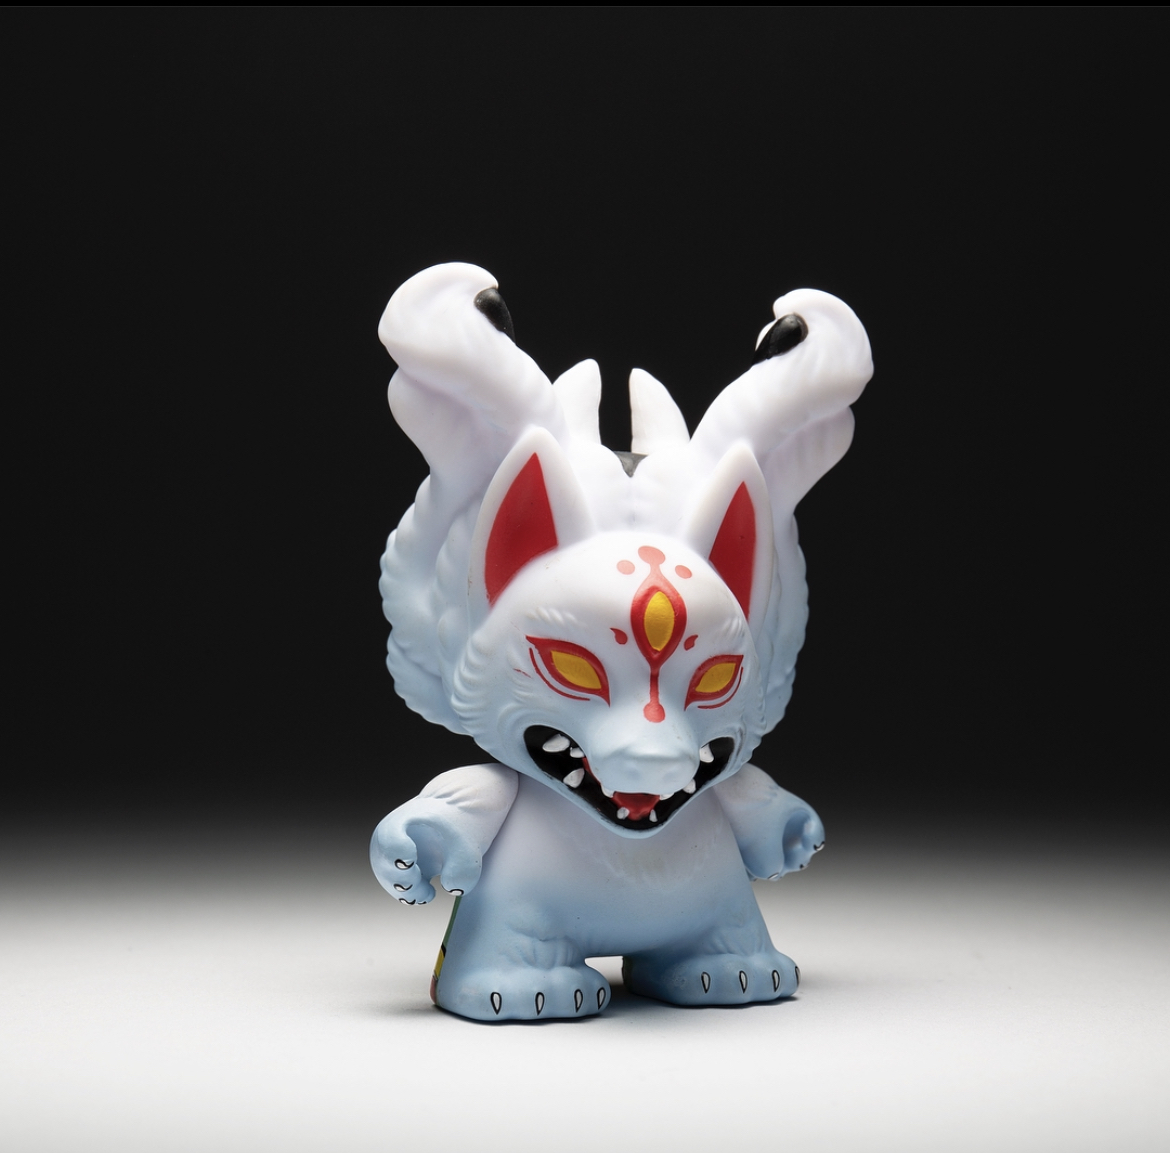 kyuubi 3" dunny city Cryptids candie bolton